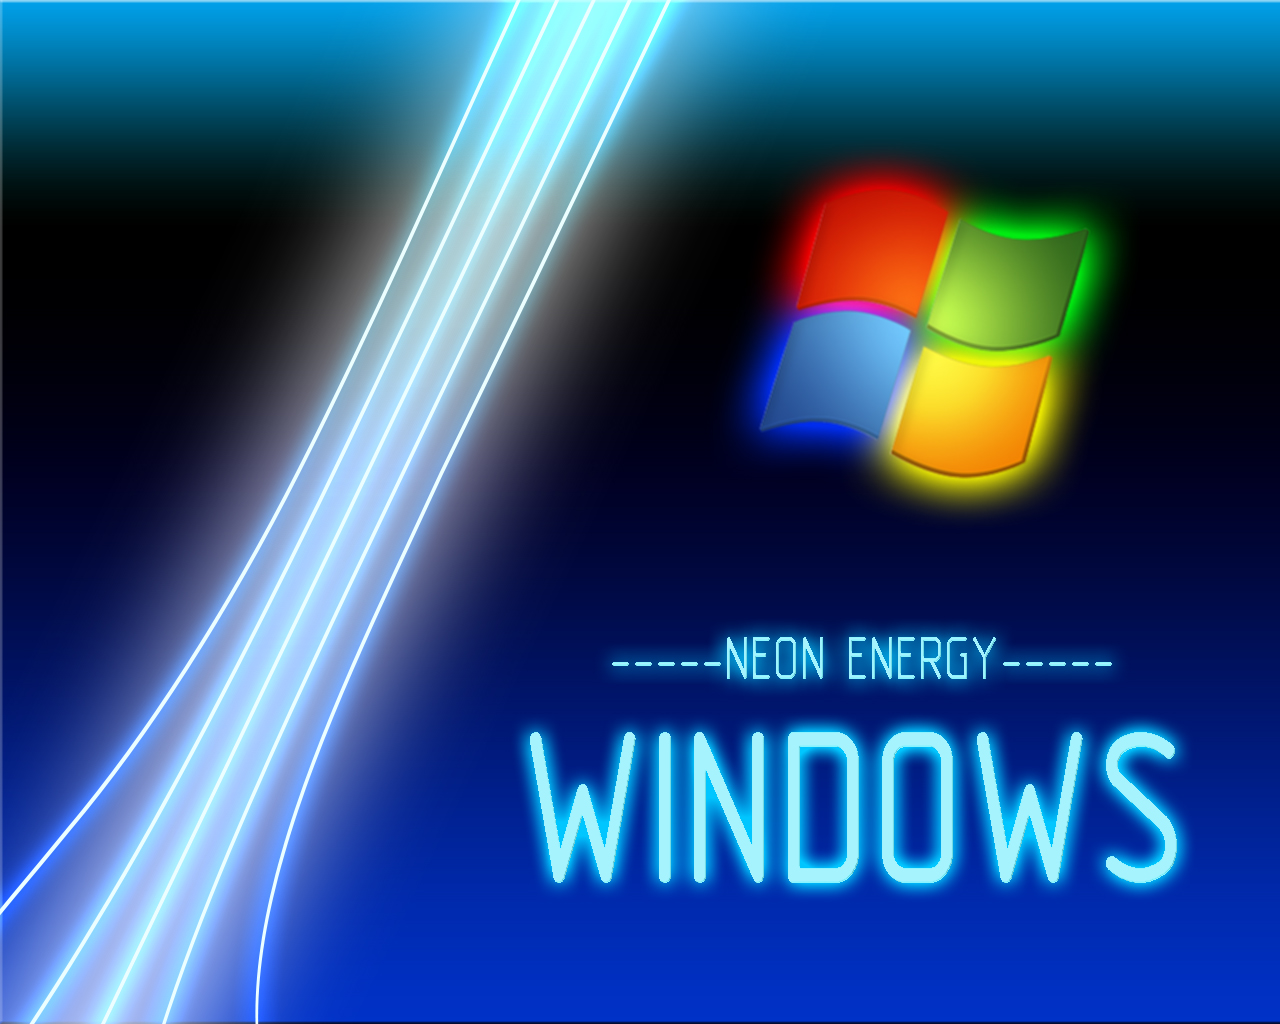 Download Night themes Windows on CrystalXP.net - Backgrounds